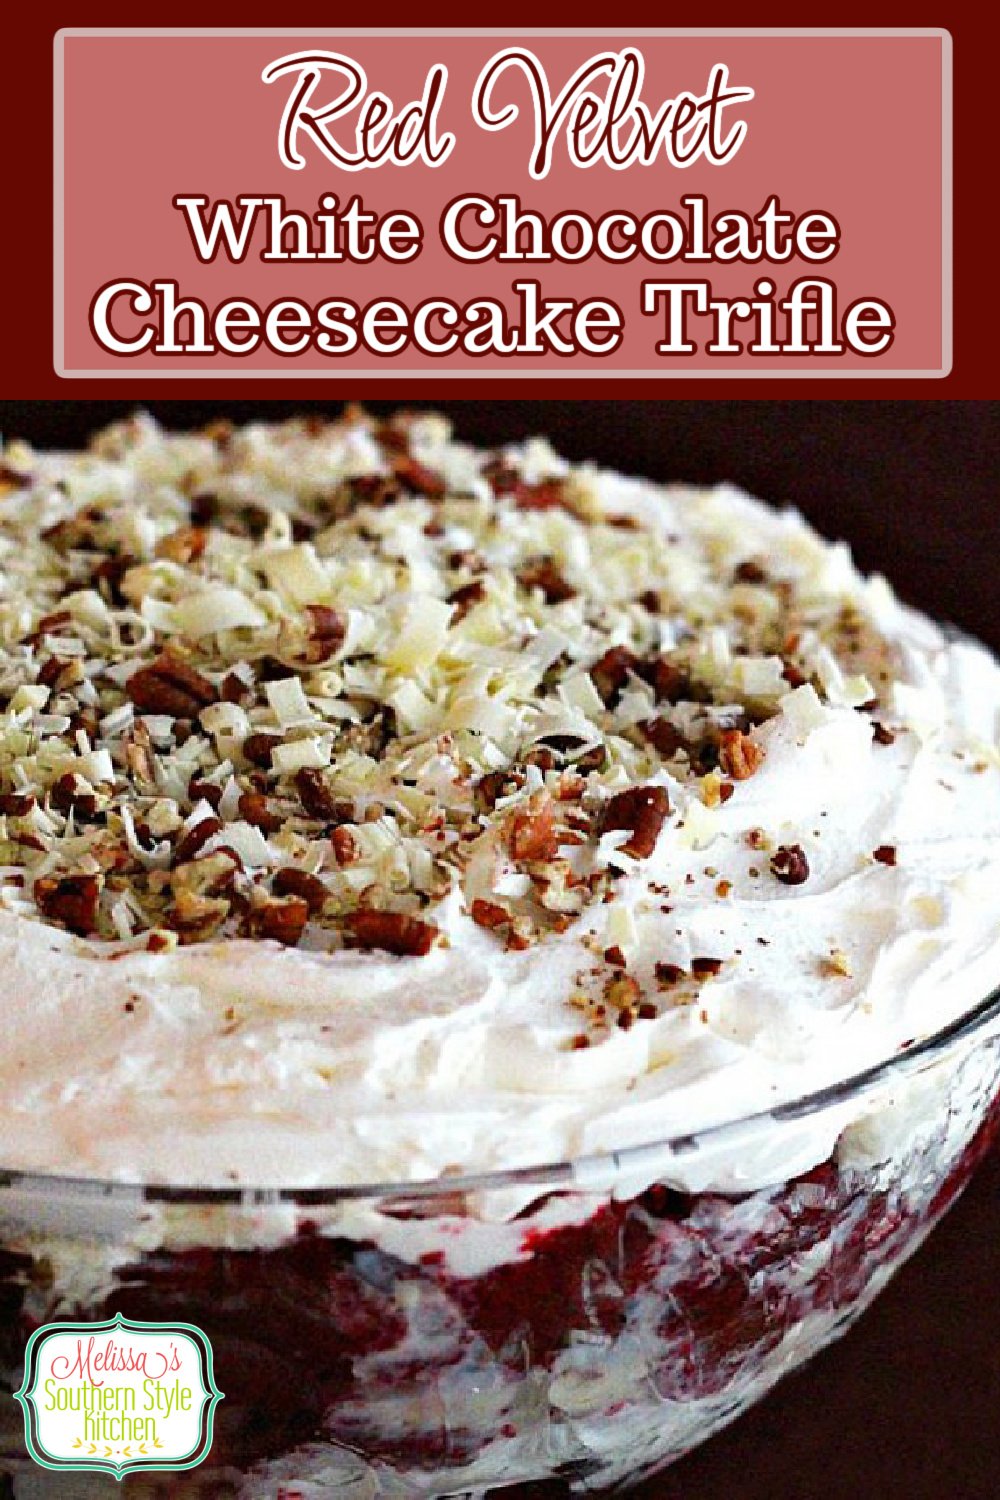 Add this stunning Red Velvet white chocolate cheesecake Trifle to your special occasion and holiday desserts menu #redvelvettrifle #redvelvetdesserts #chocolatetrifles #cheesecake #redvelvetcheesecake #trifles #triflerecipes #chocolatedesserts